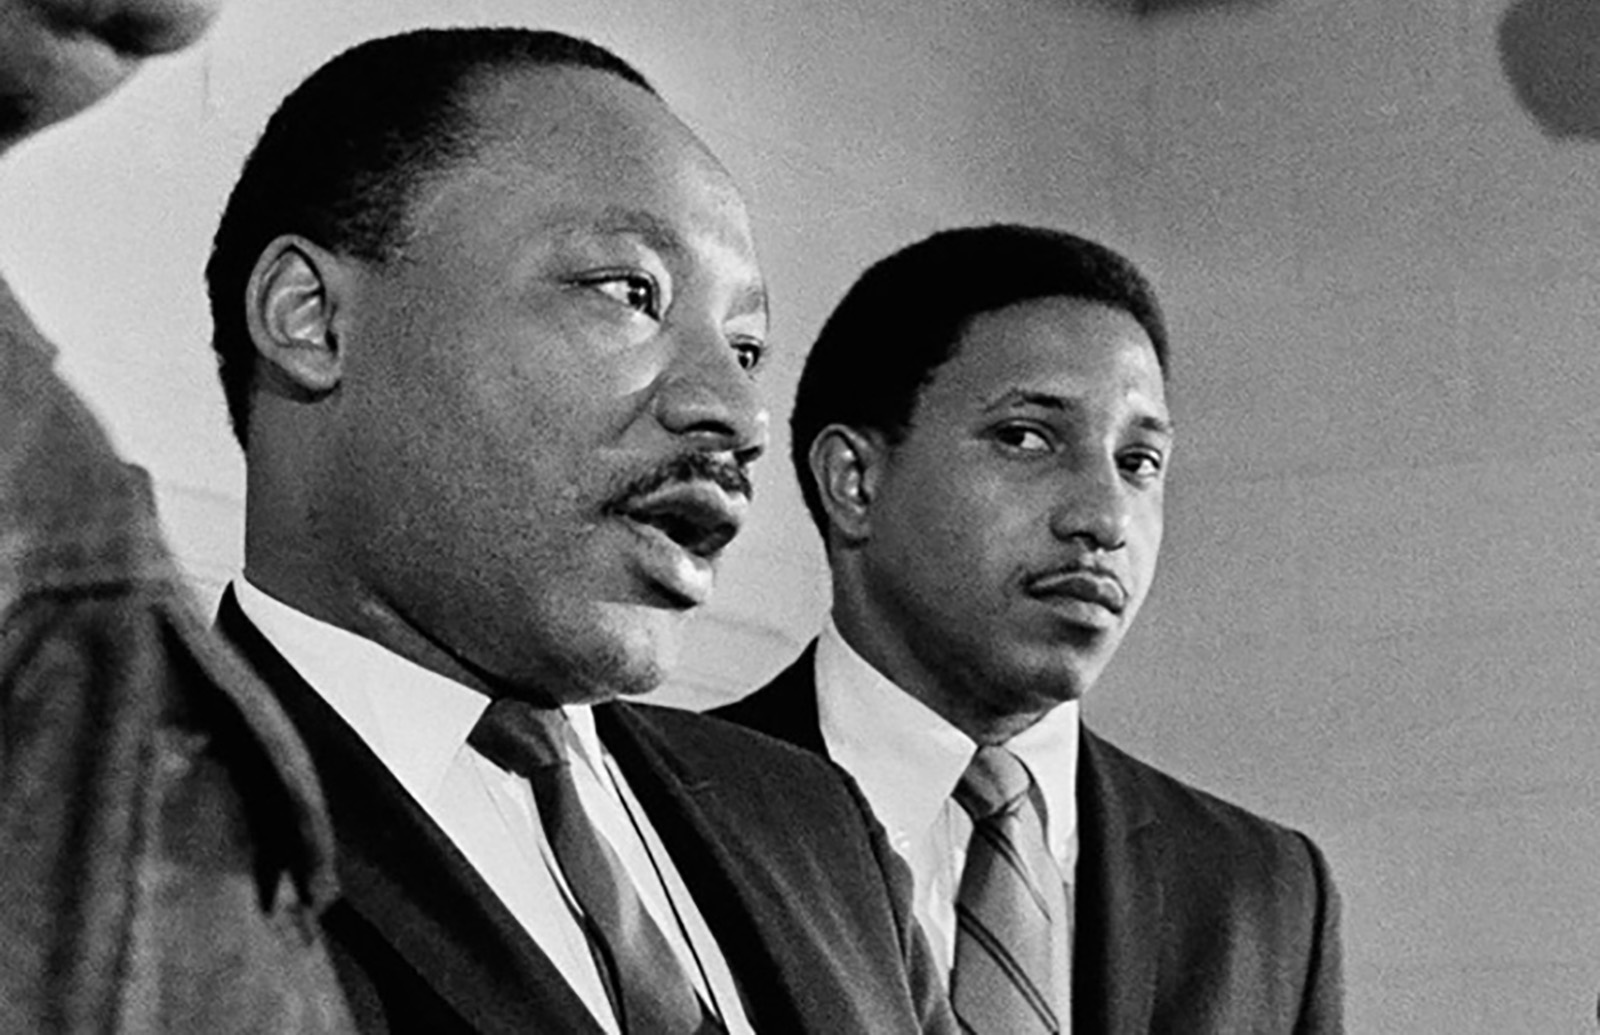 Bernard Lafayette Jr., right, is pictured with Martin Luther King Jr.